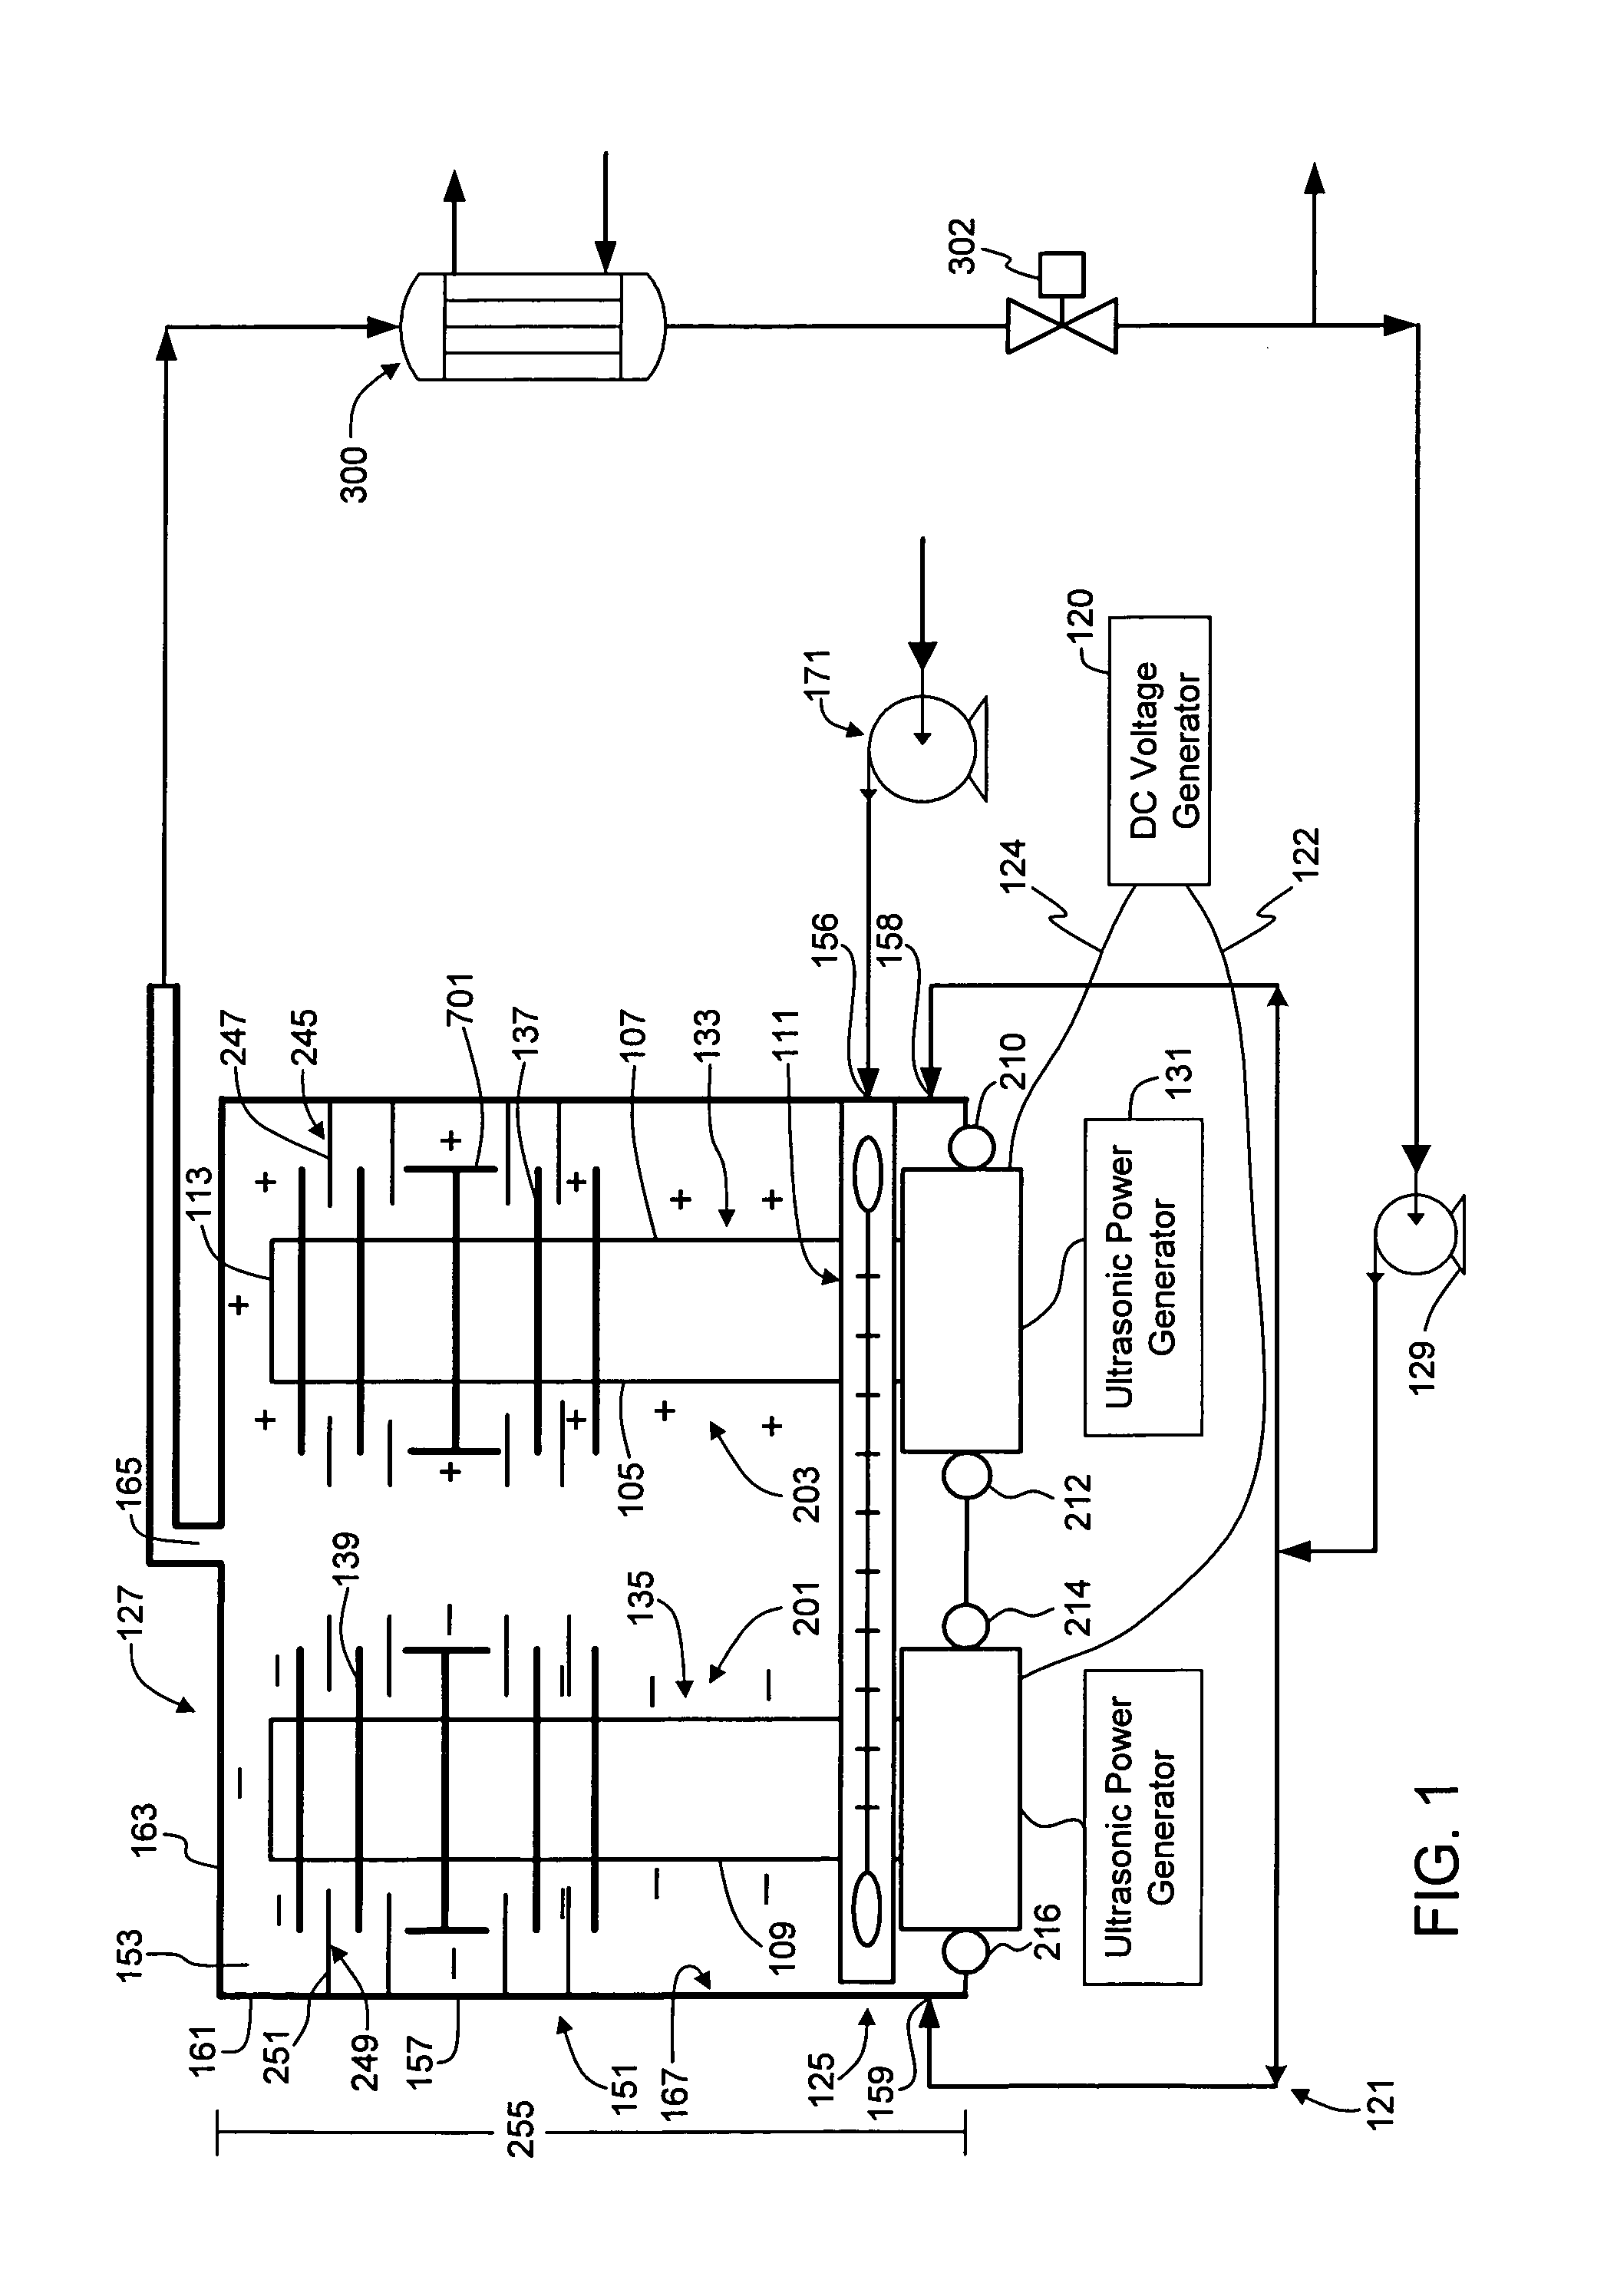 Ultrasonic treatment chamber for initiating thermonuclear fusion